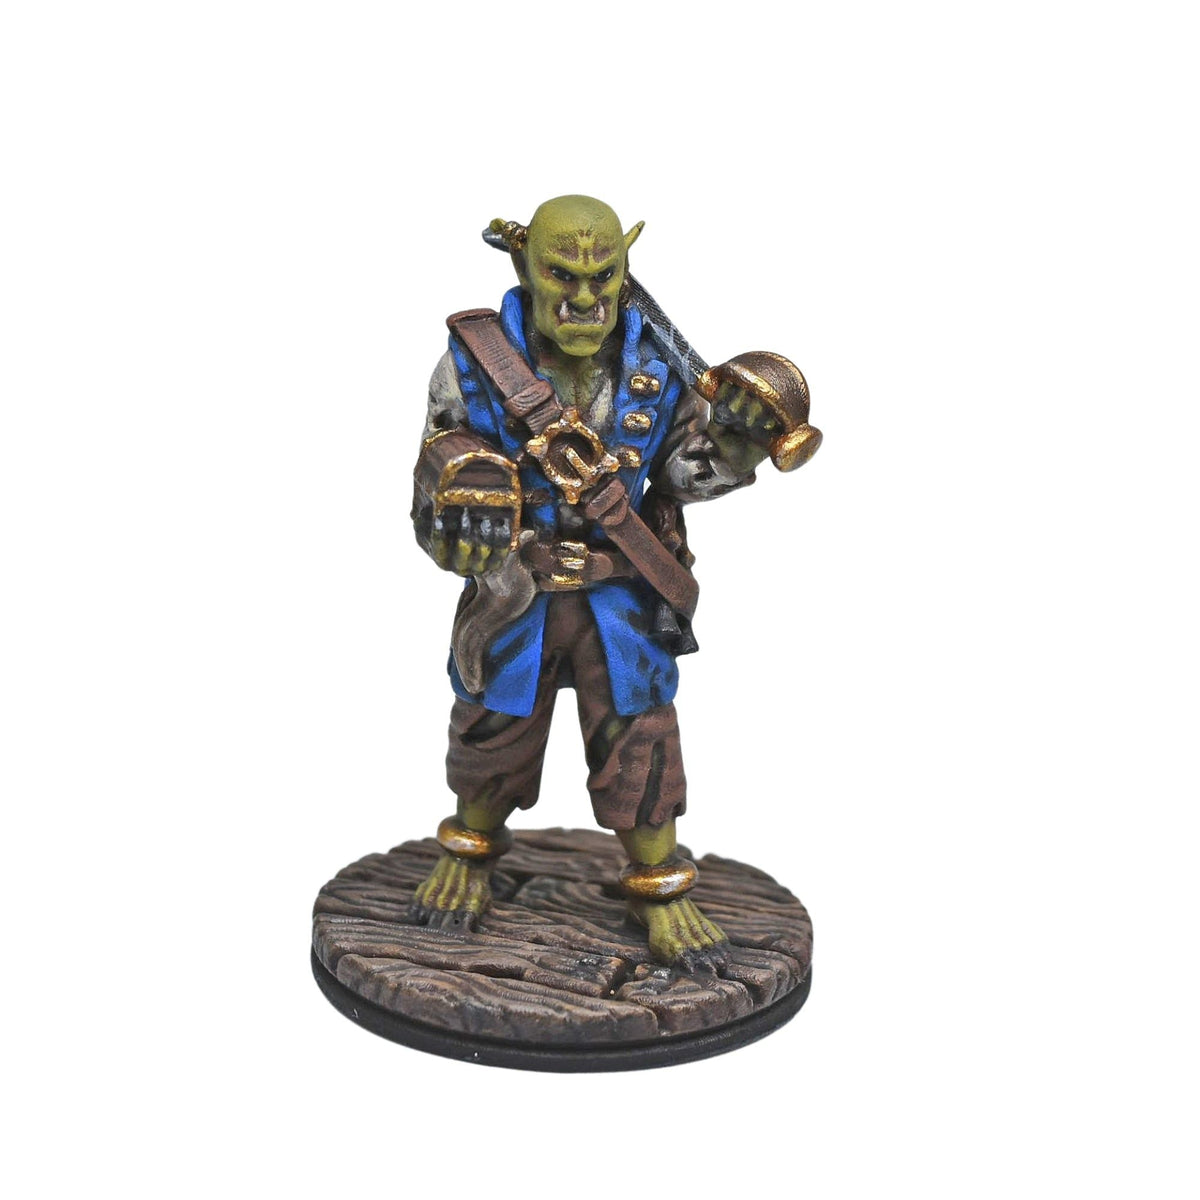 Miniature dnd figures Painted Female Pirate Captain 3D printed for